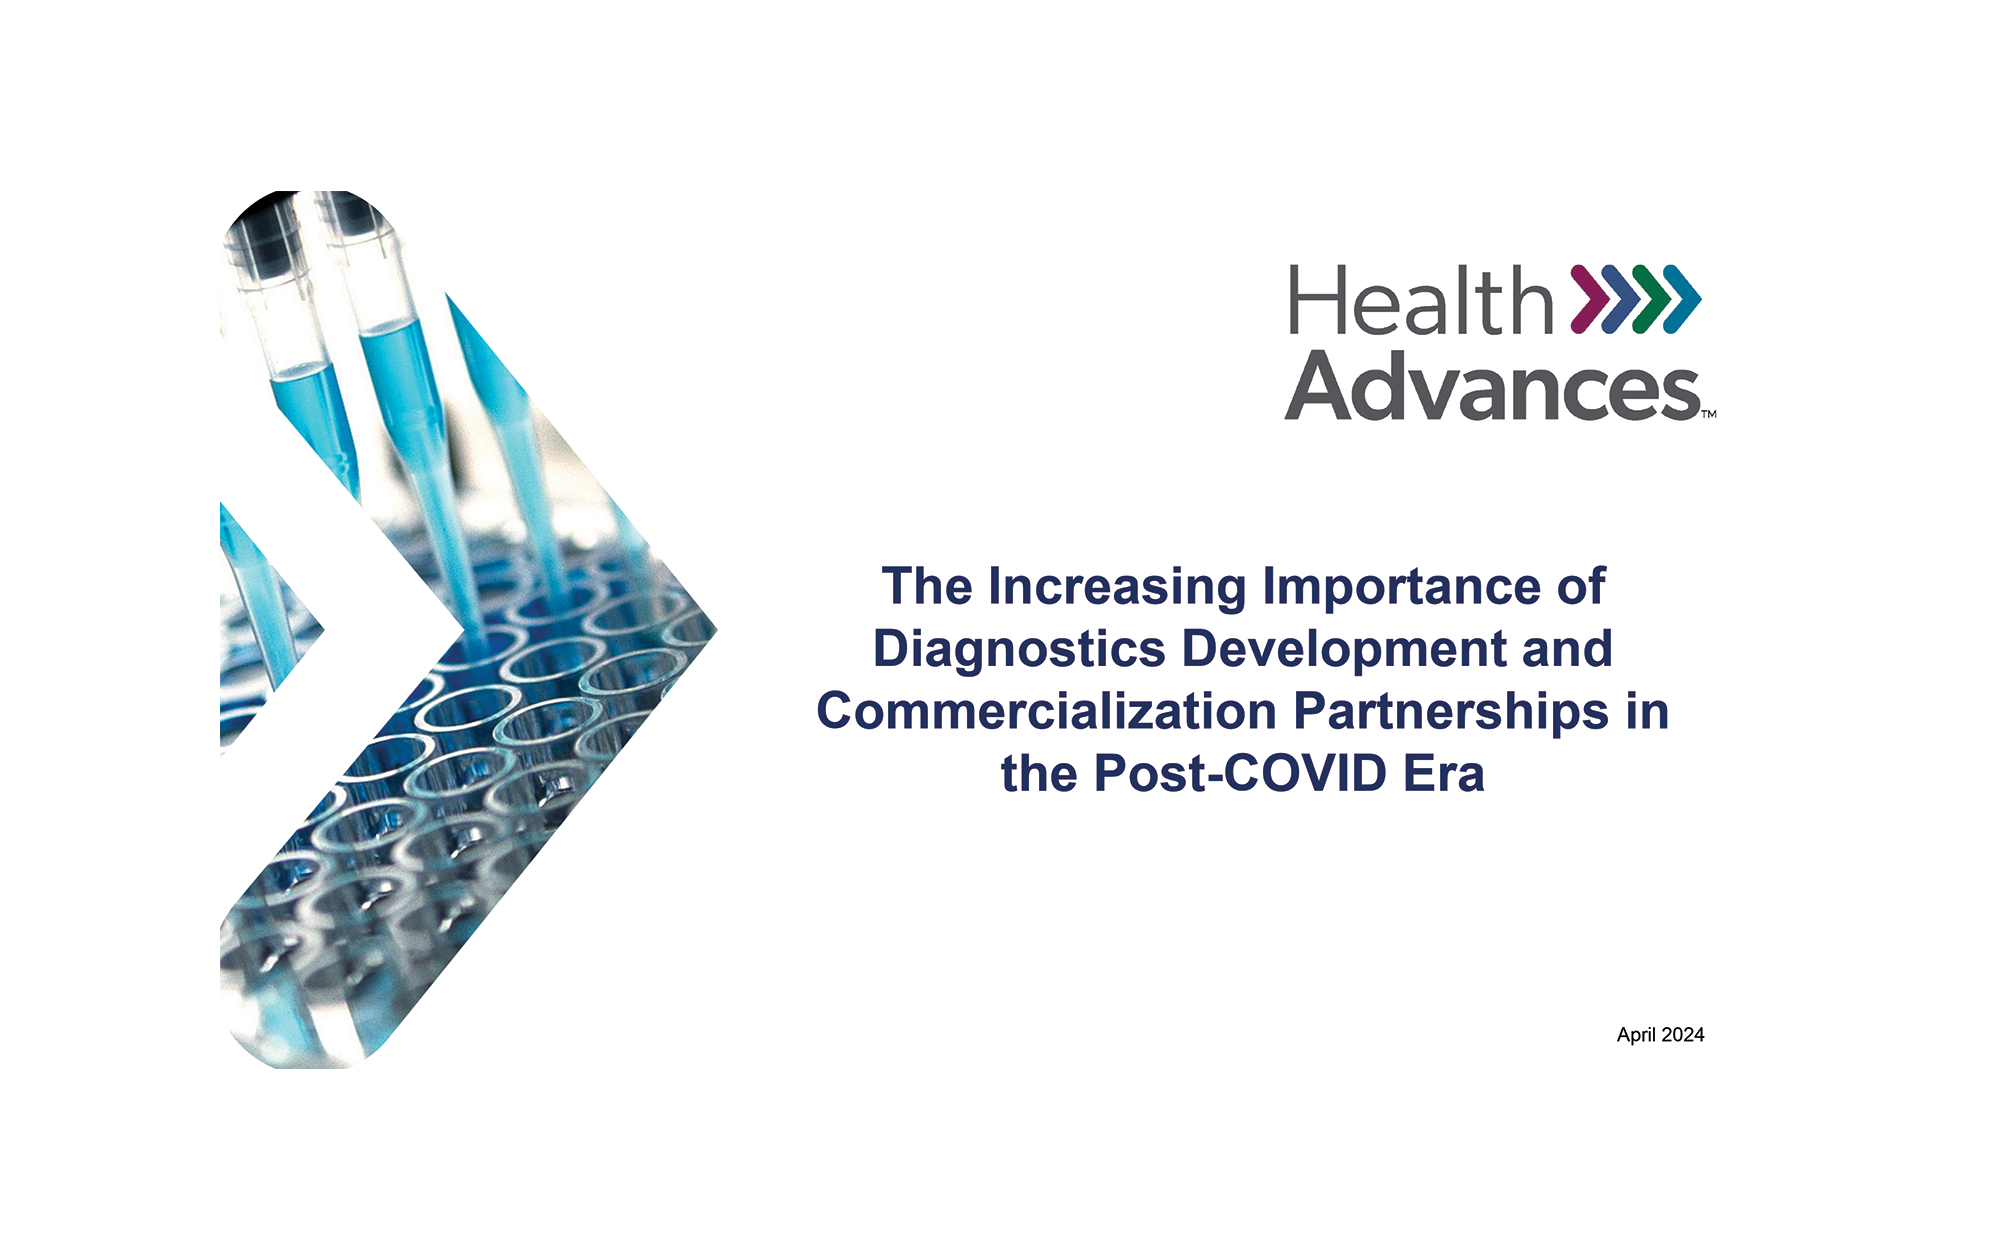 The Increasing Importance of Diagnostics Development and Commercialization Partnerships in the Post-COVID Era